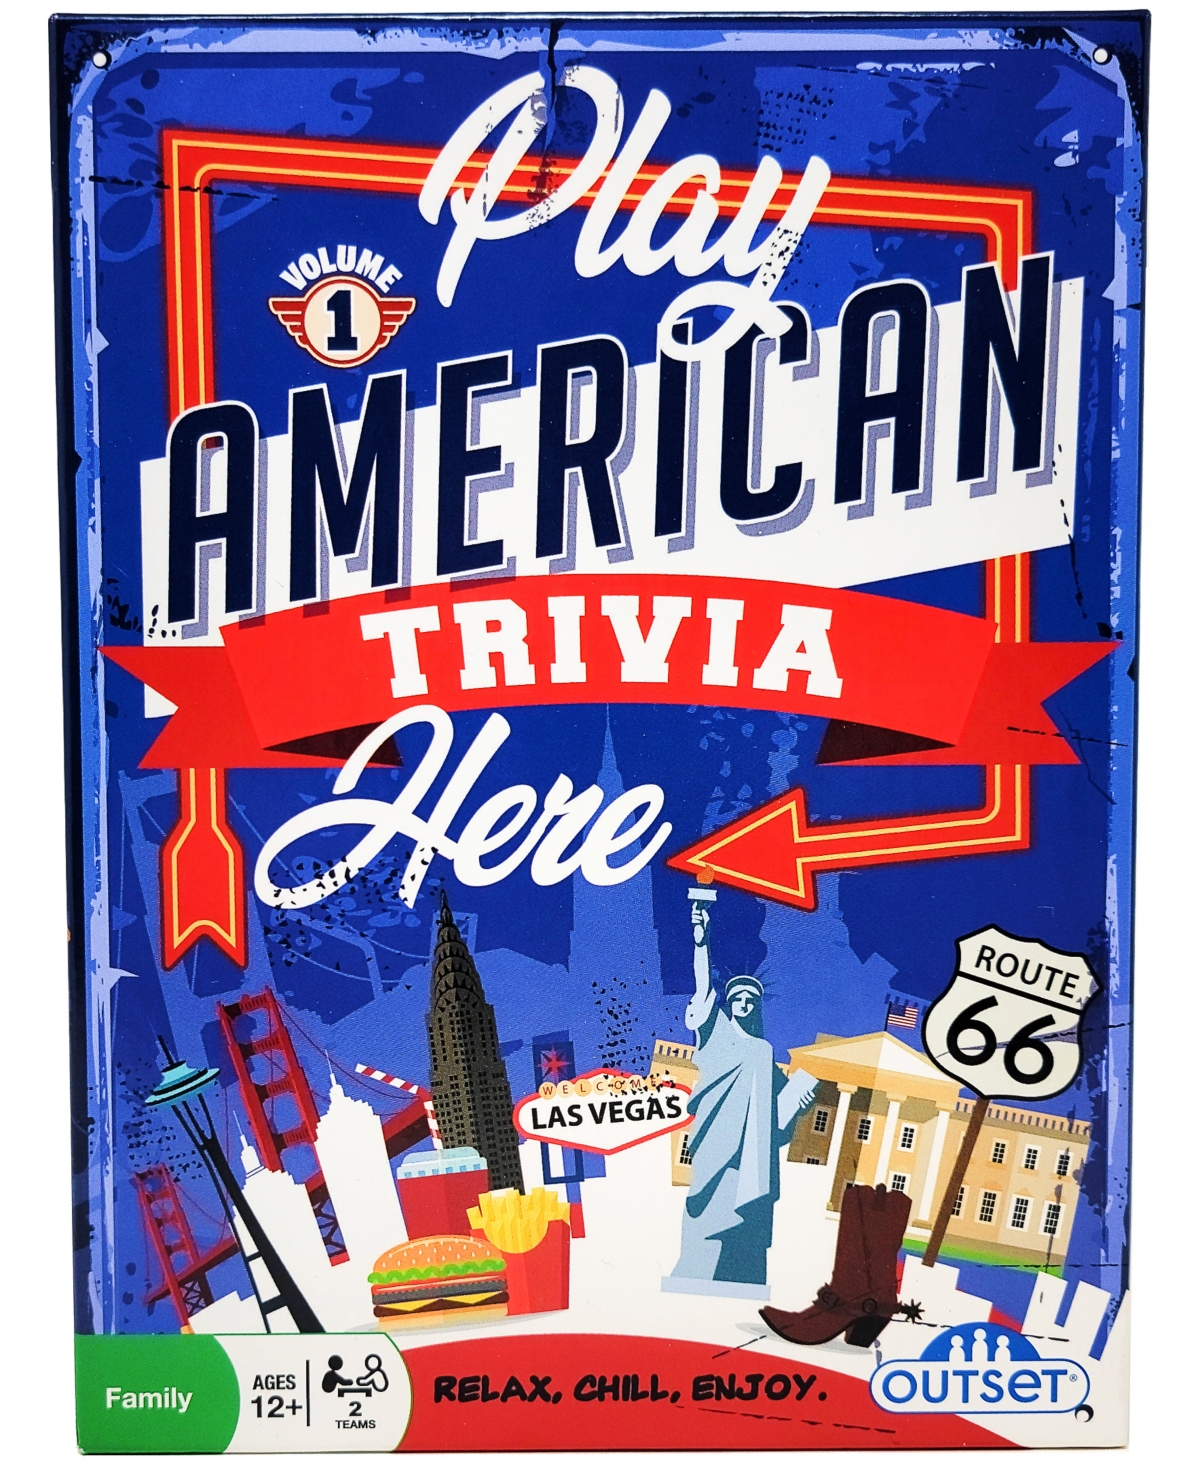 Shop University Games Outset Media Play American Trivia Here Volume 1 In No Color